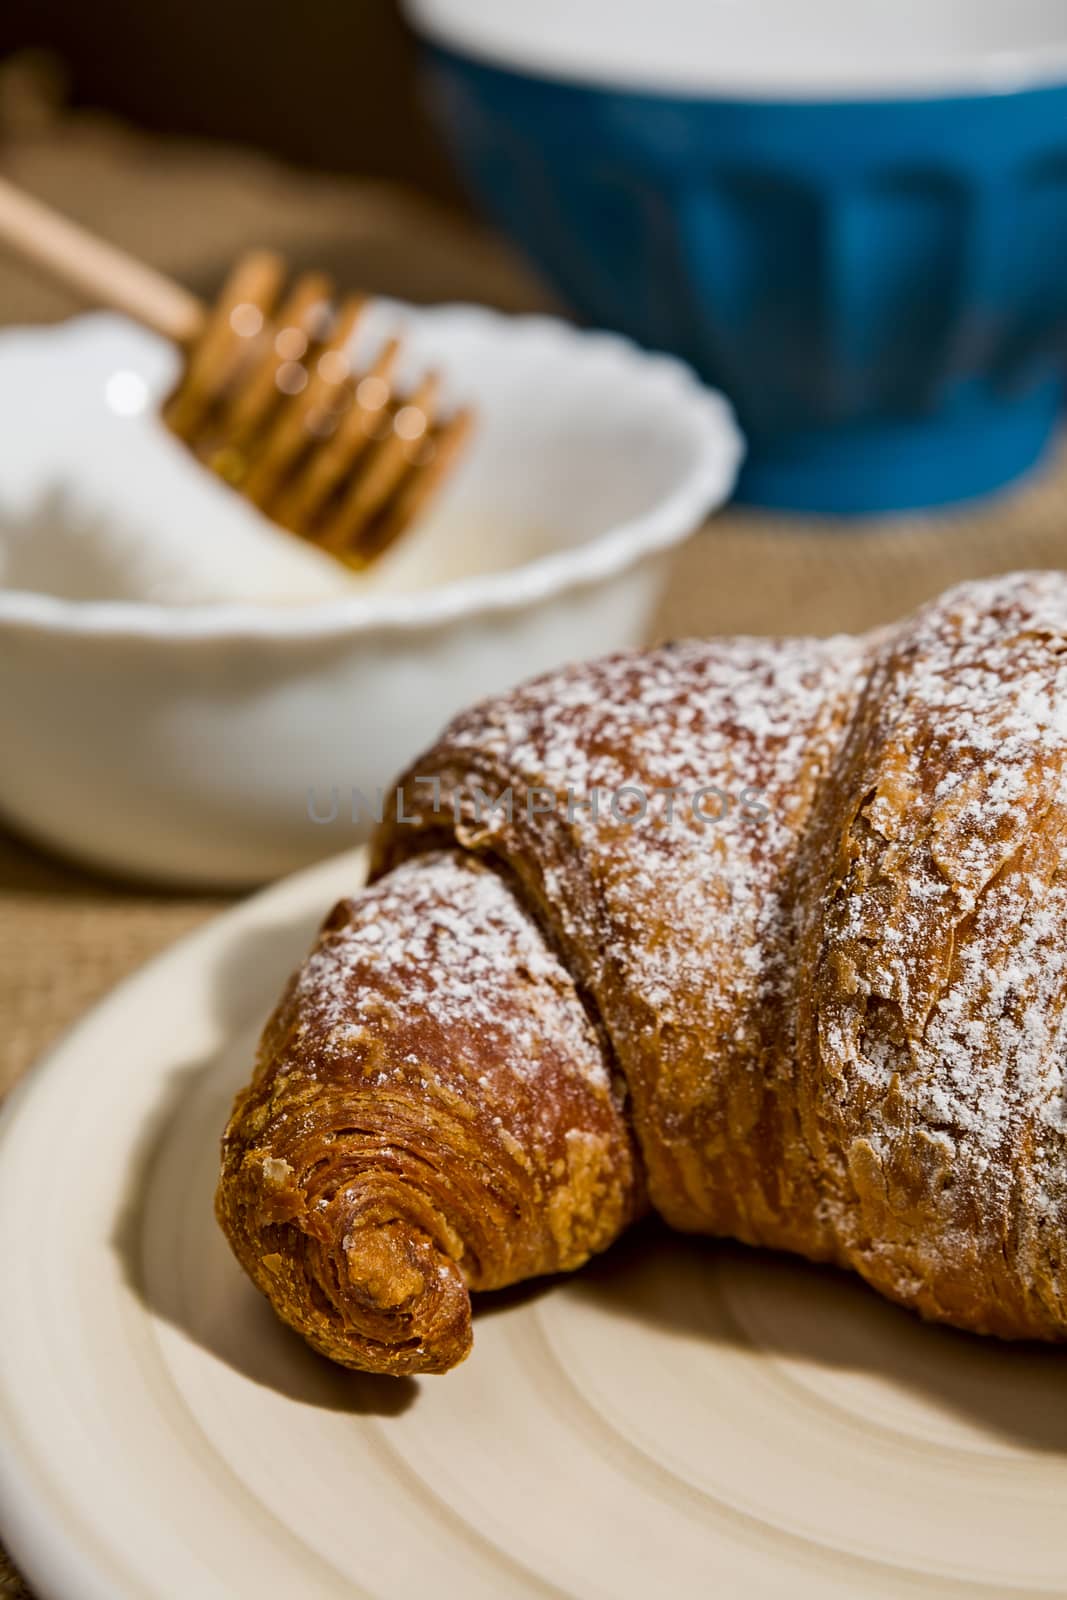 Closeup of a croissant on a plate by LuigiMorbidelli